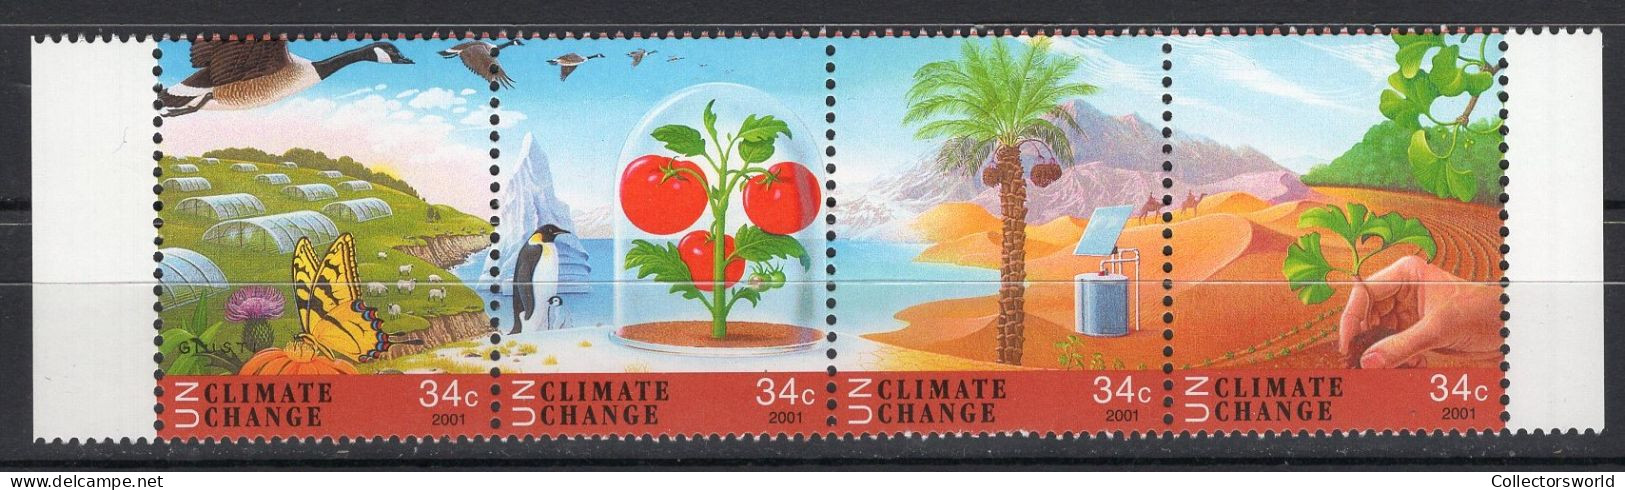 United Nations UN New York Serie 4v 2001 Climate Change Bird Goose Butterfly Insect Penguin Vegetables Camel MNH - Ungebraucht